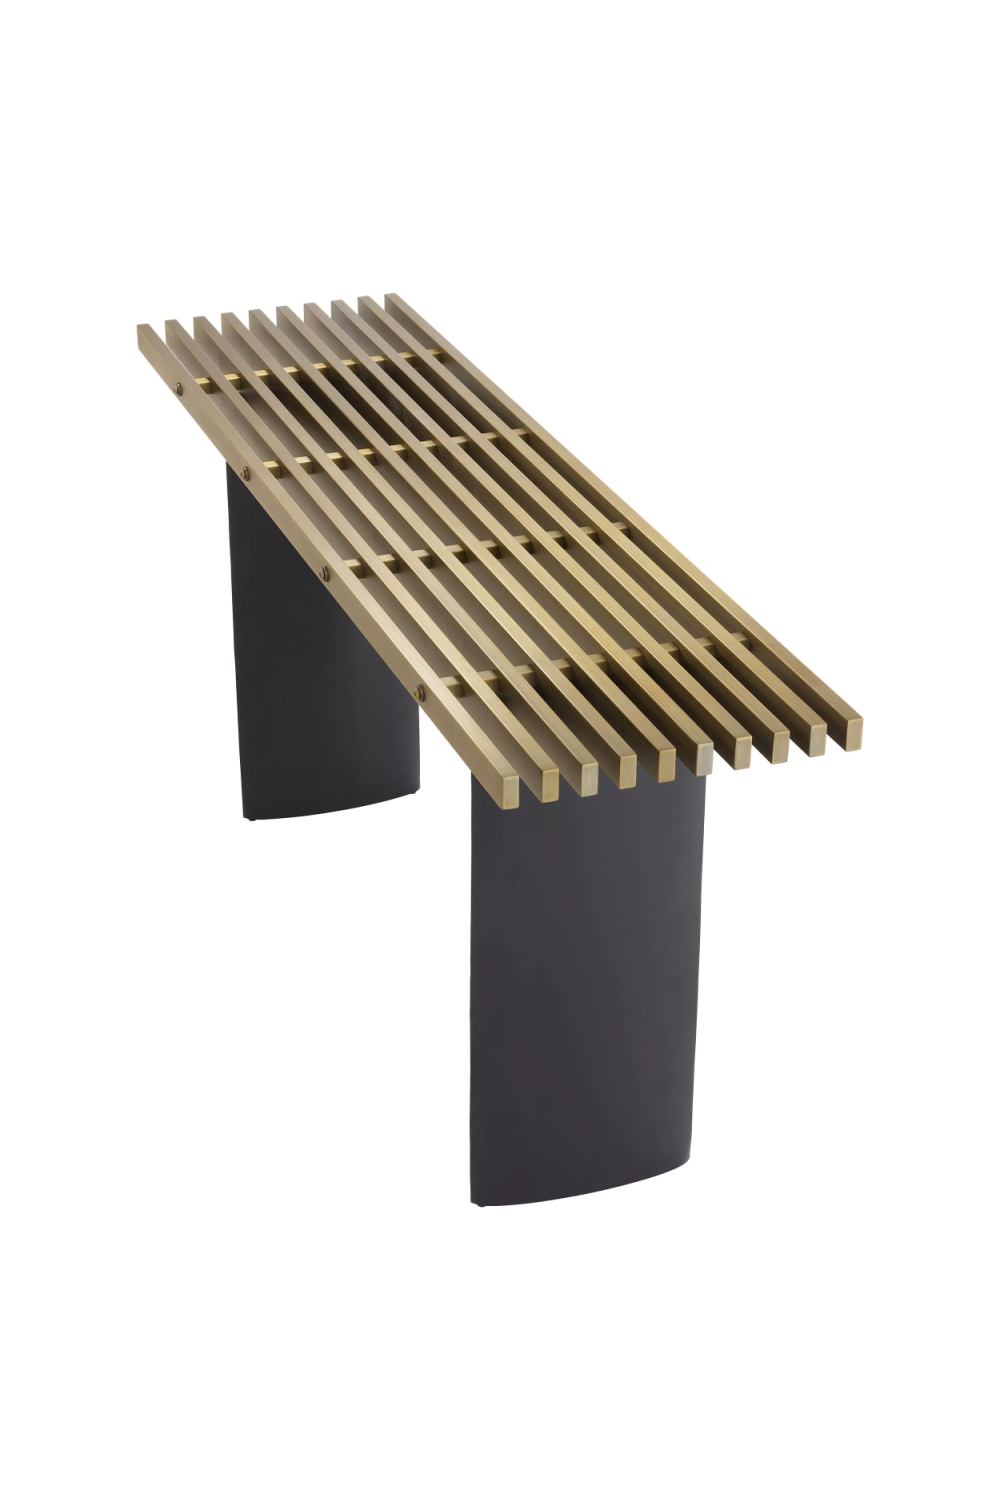 Brushed Brass Finish Console Table | Eichholtz Vauclair | OROA.com